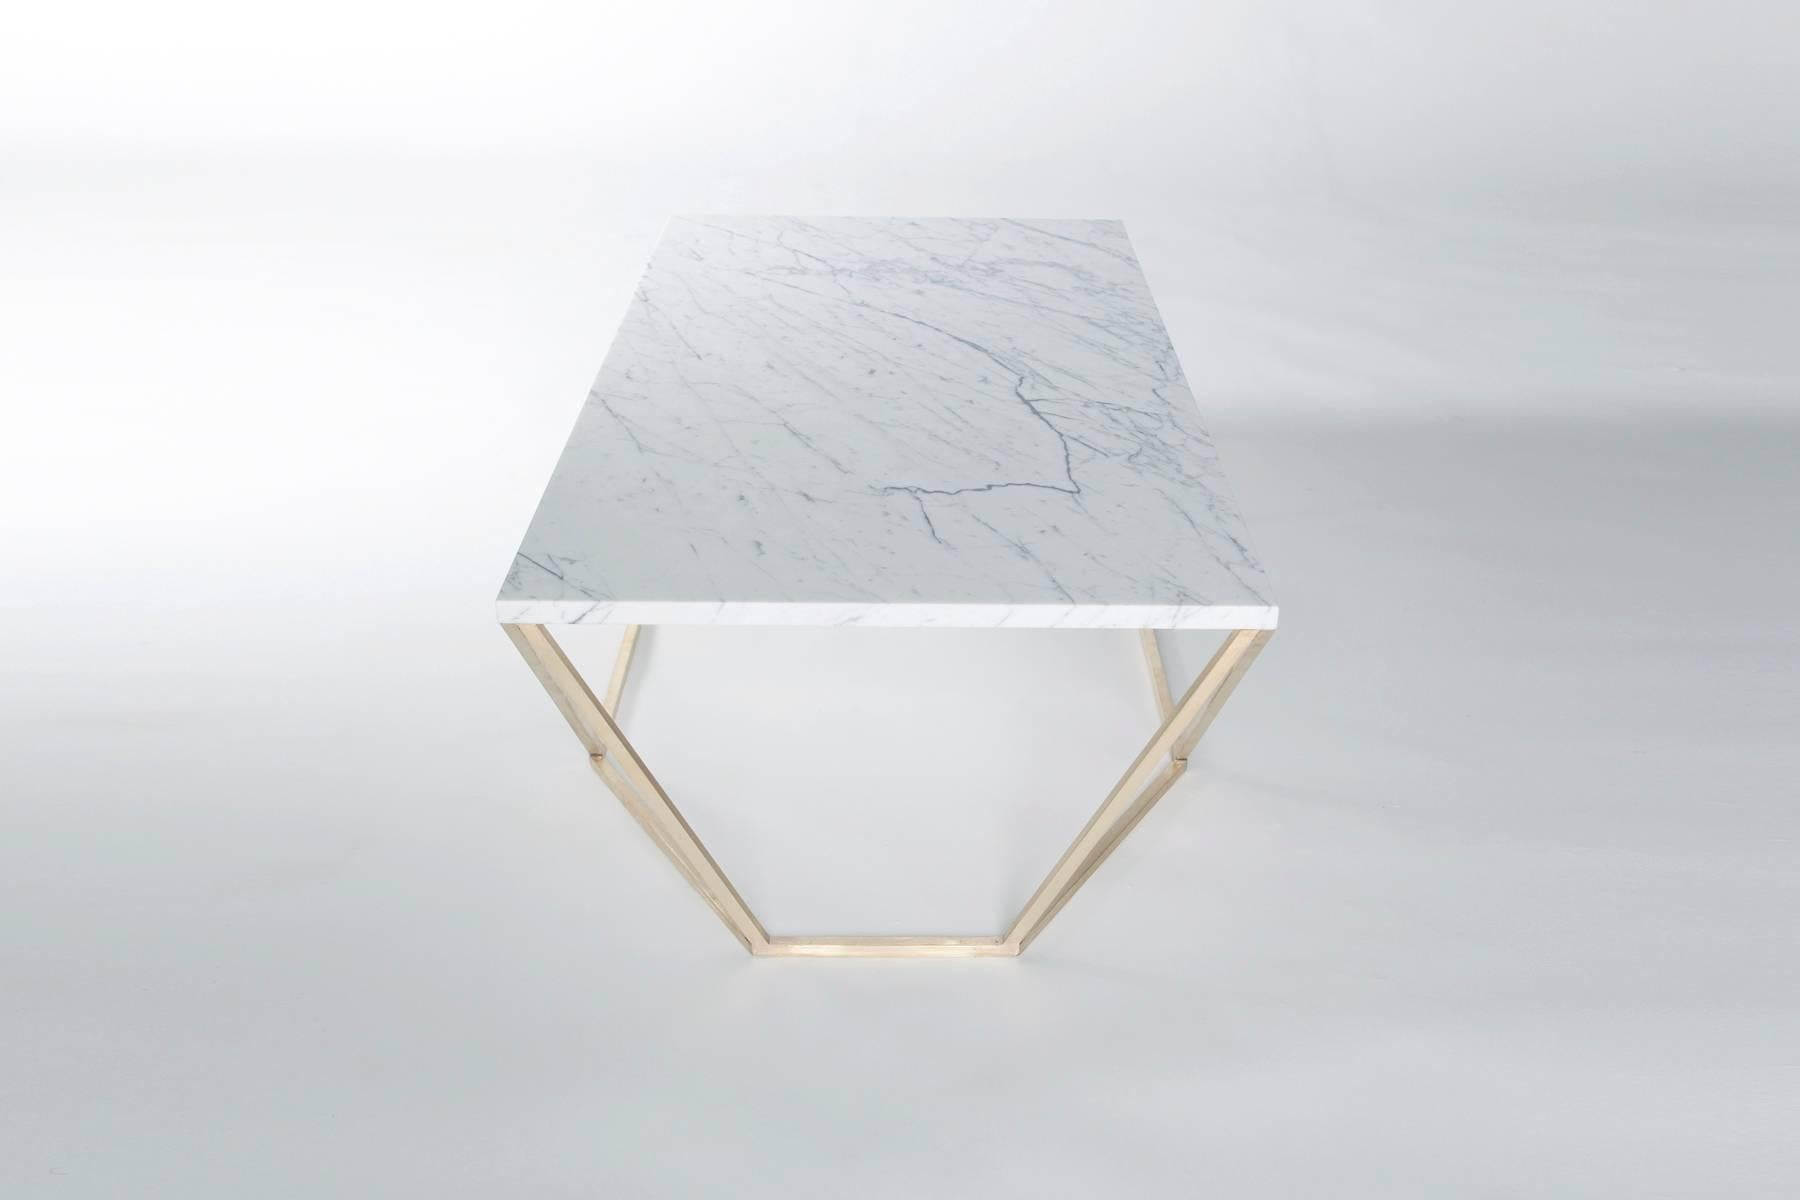 The newest finish combination for the Dusk coffee table features a geometric solid brushed-brass base with a white Veneto marble tabletop.

The octagon-meets-rectangle shape transforms when viewed from different angles. The Dusk coffee table was